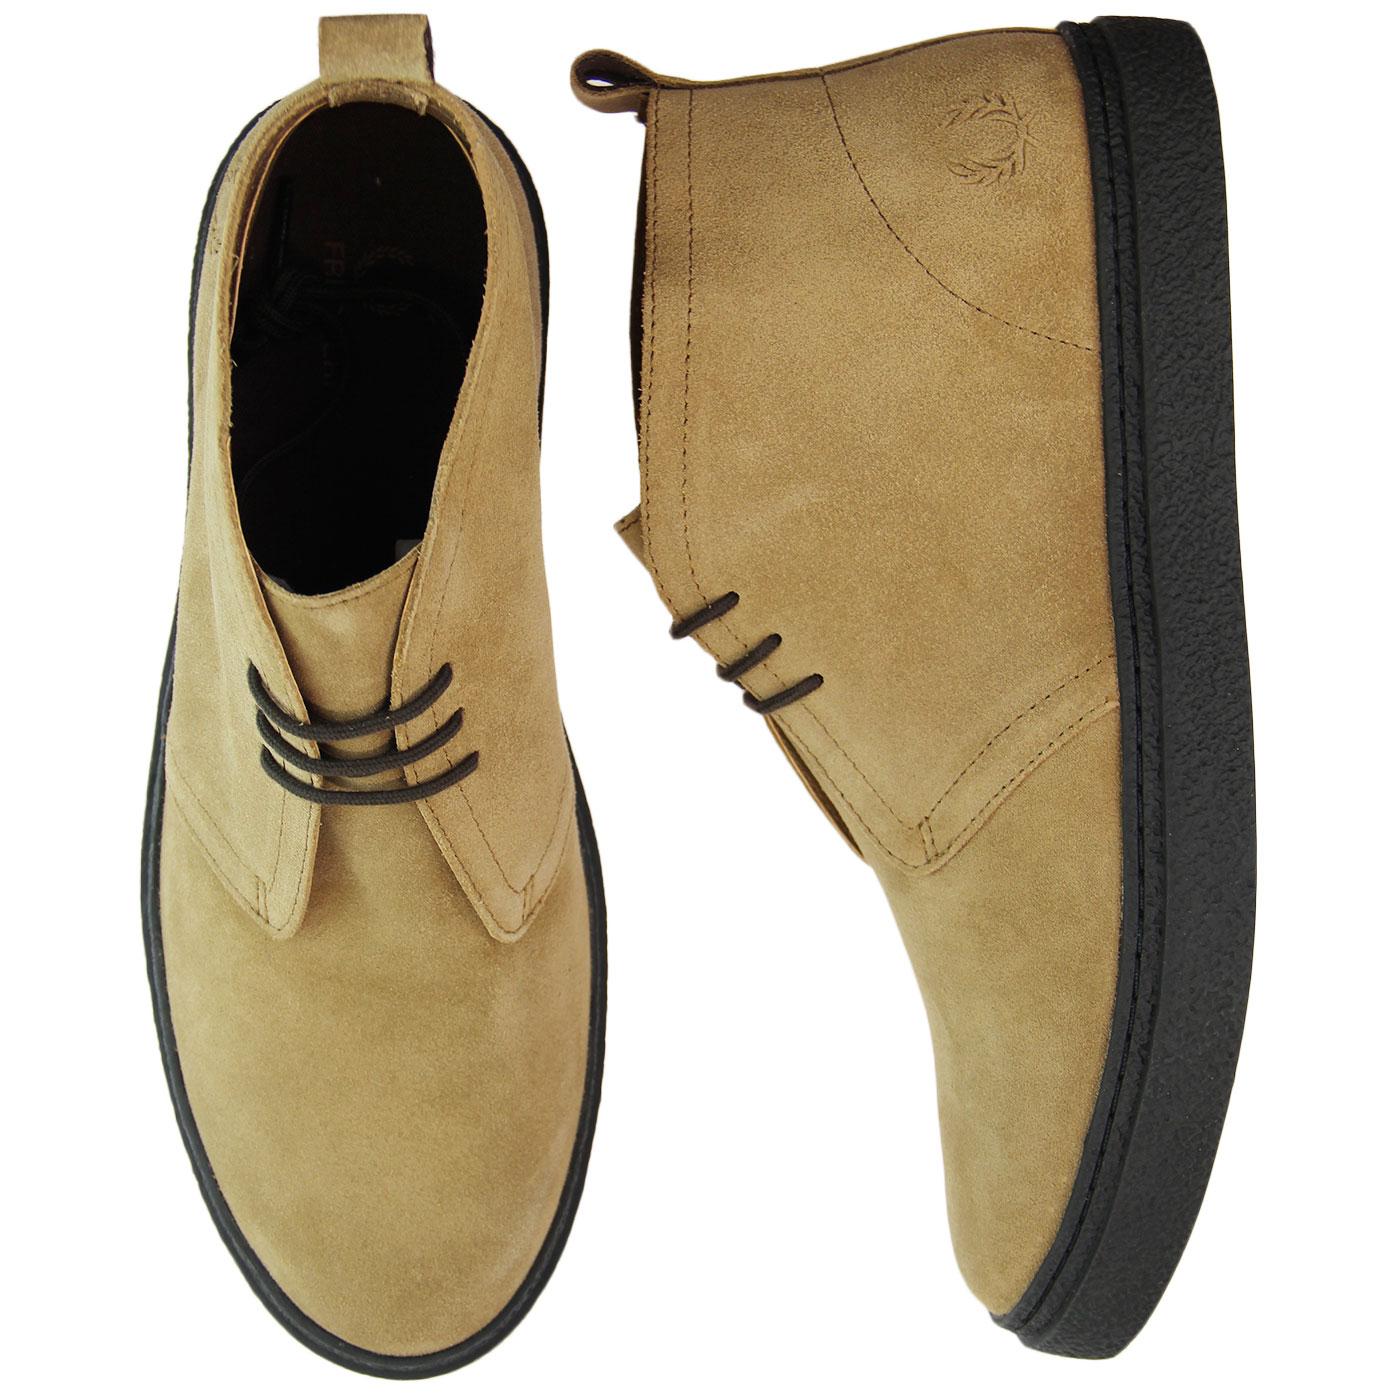 FRED PERRY Hawley Retro Mod Suede Desert Boots Almond